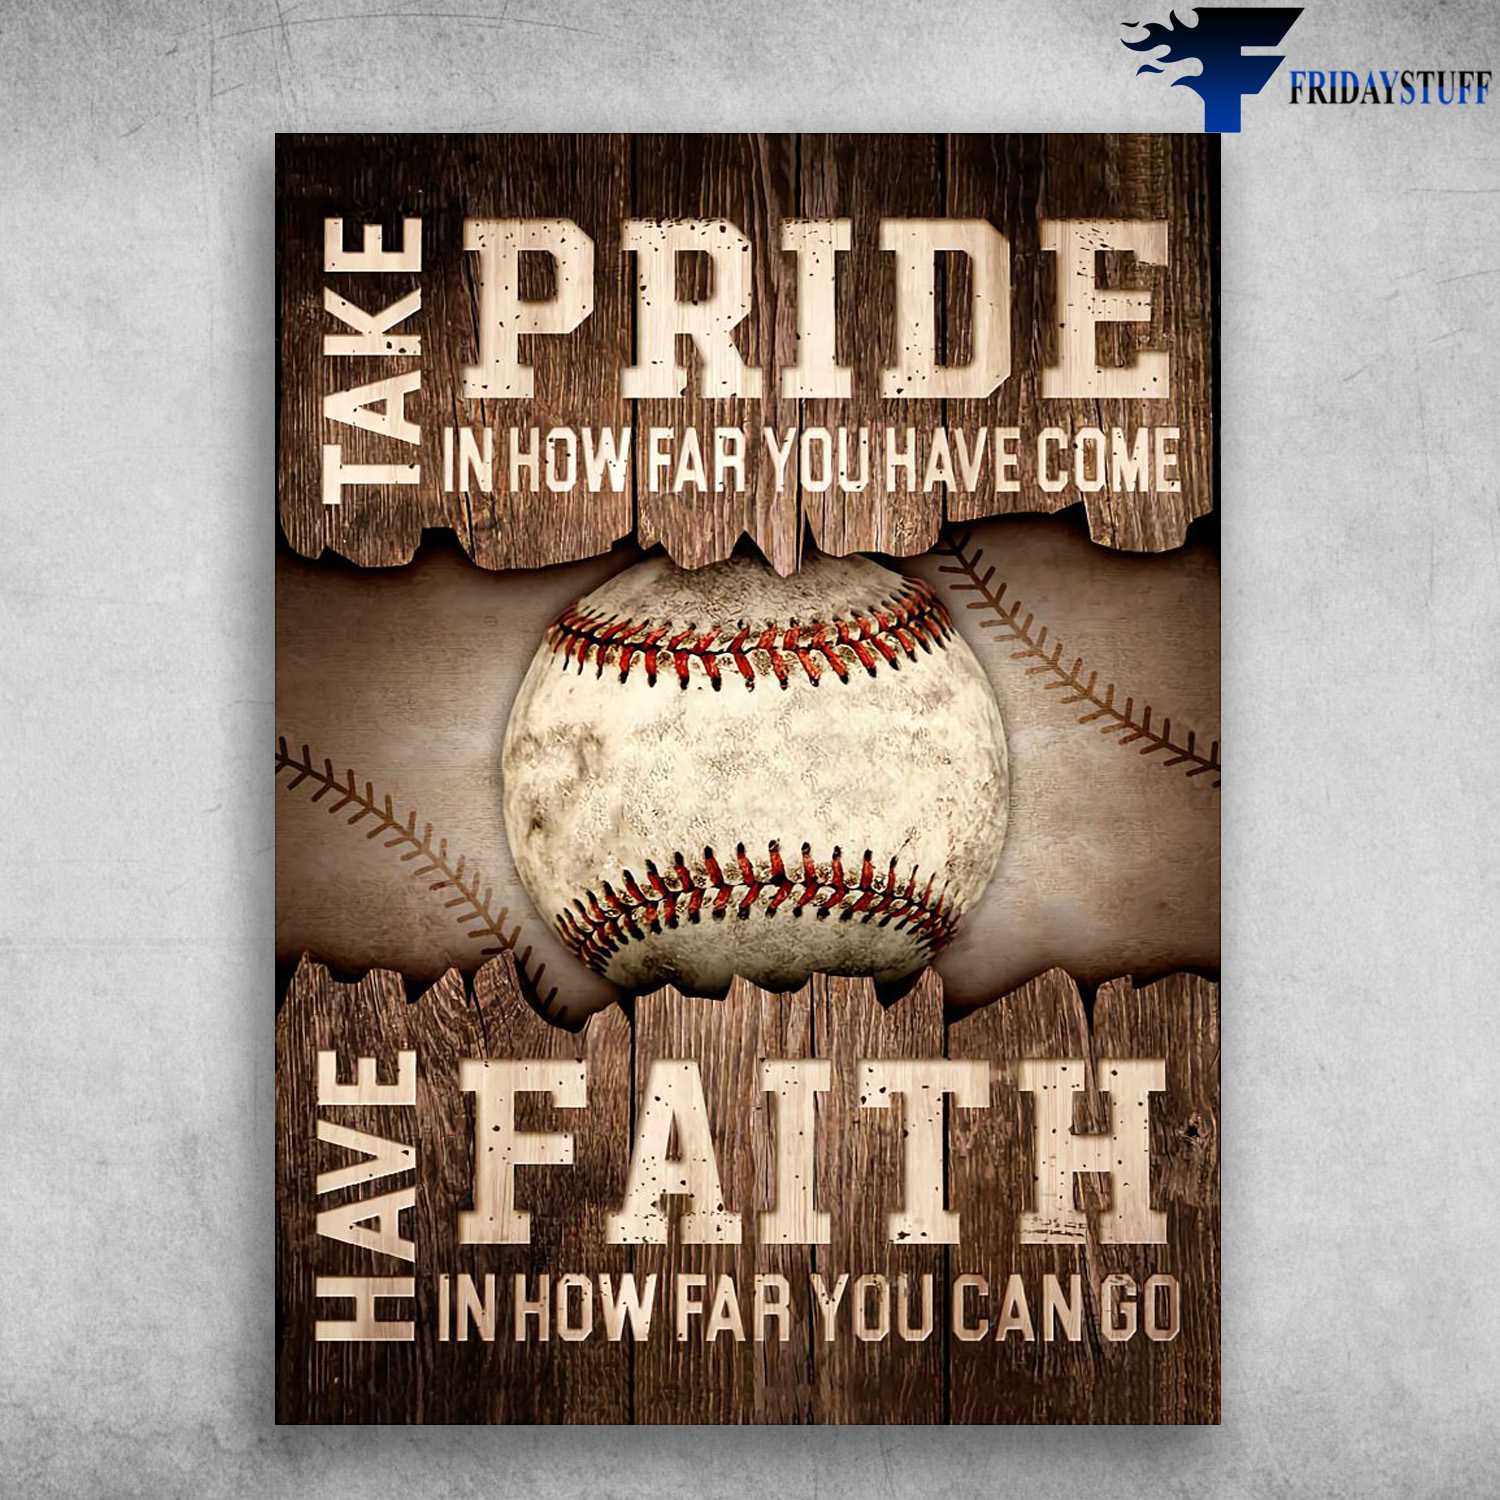 Baseball Poster - Take Pride In How Far You Have Come, Have Faith In How Far You Can Go